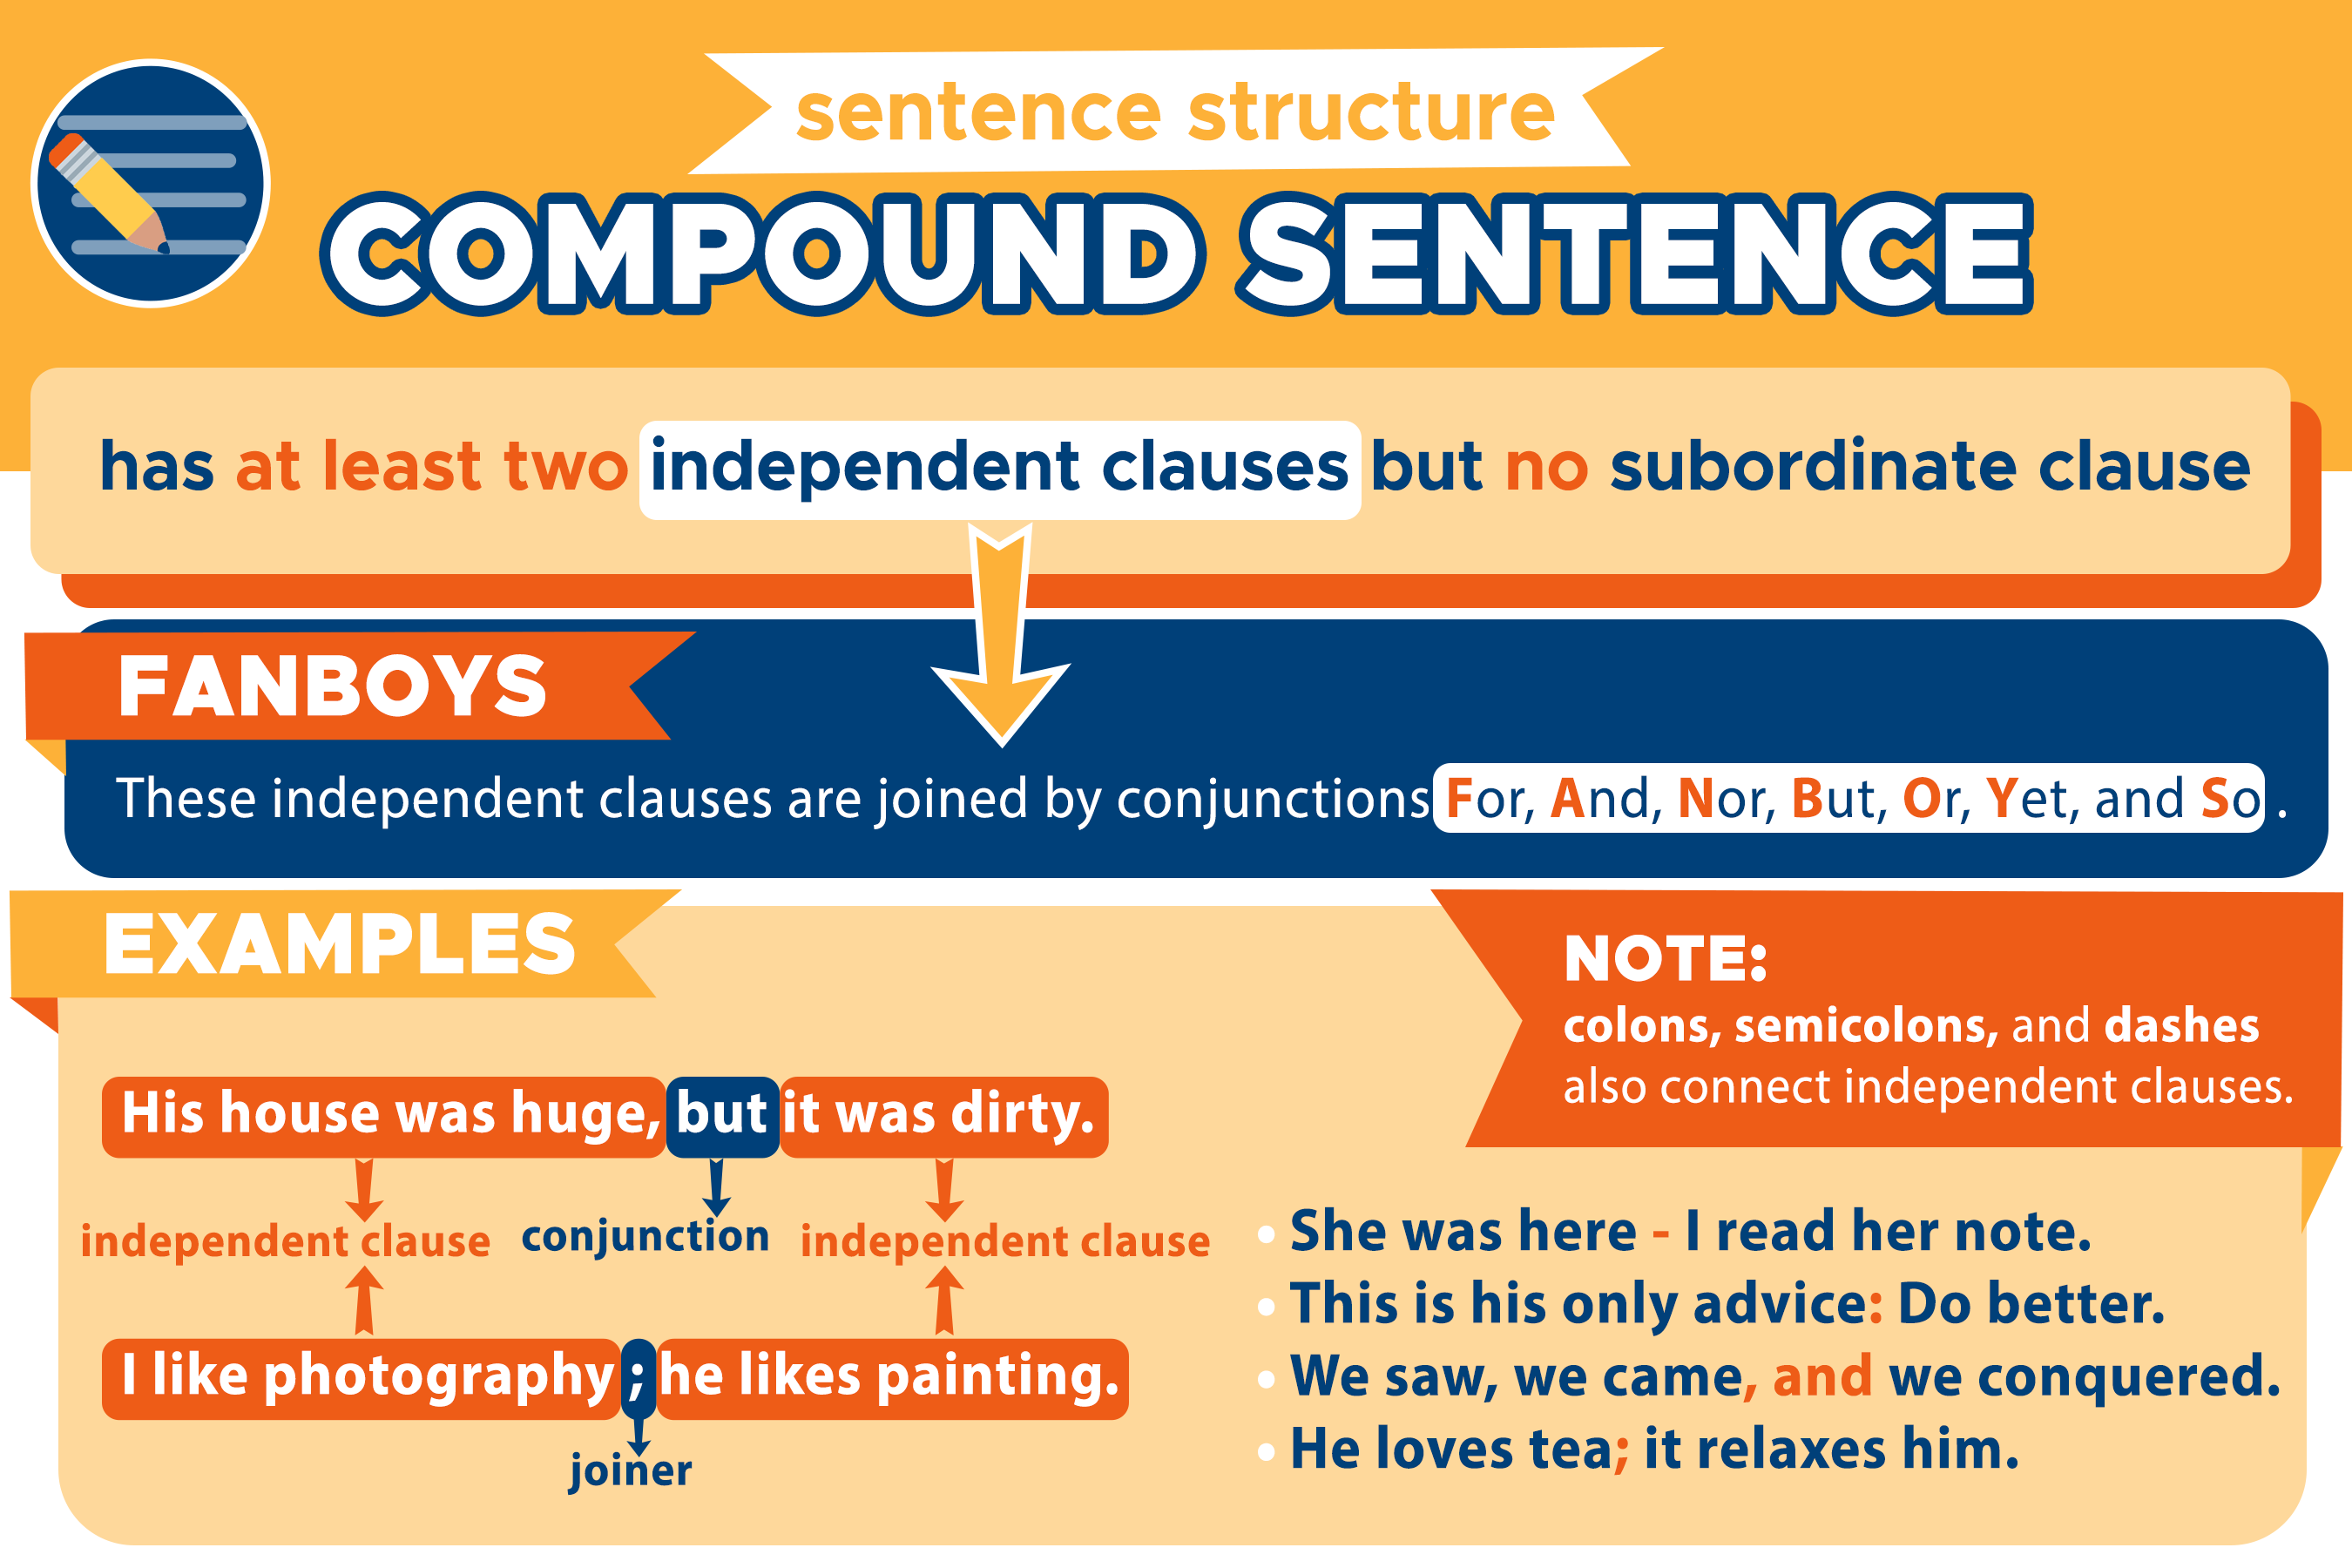 Compound Sentence Structure Definition and Examples